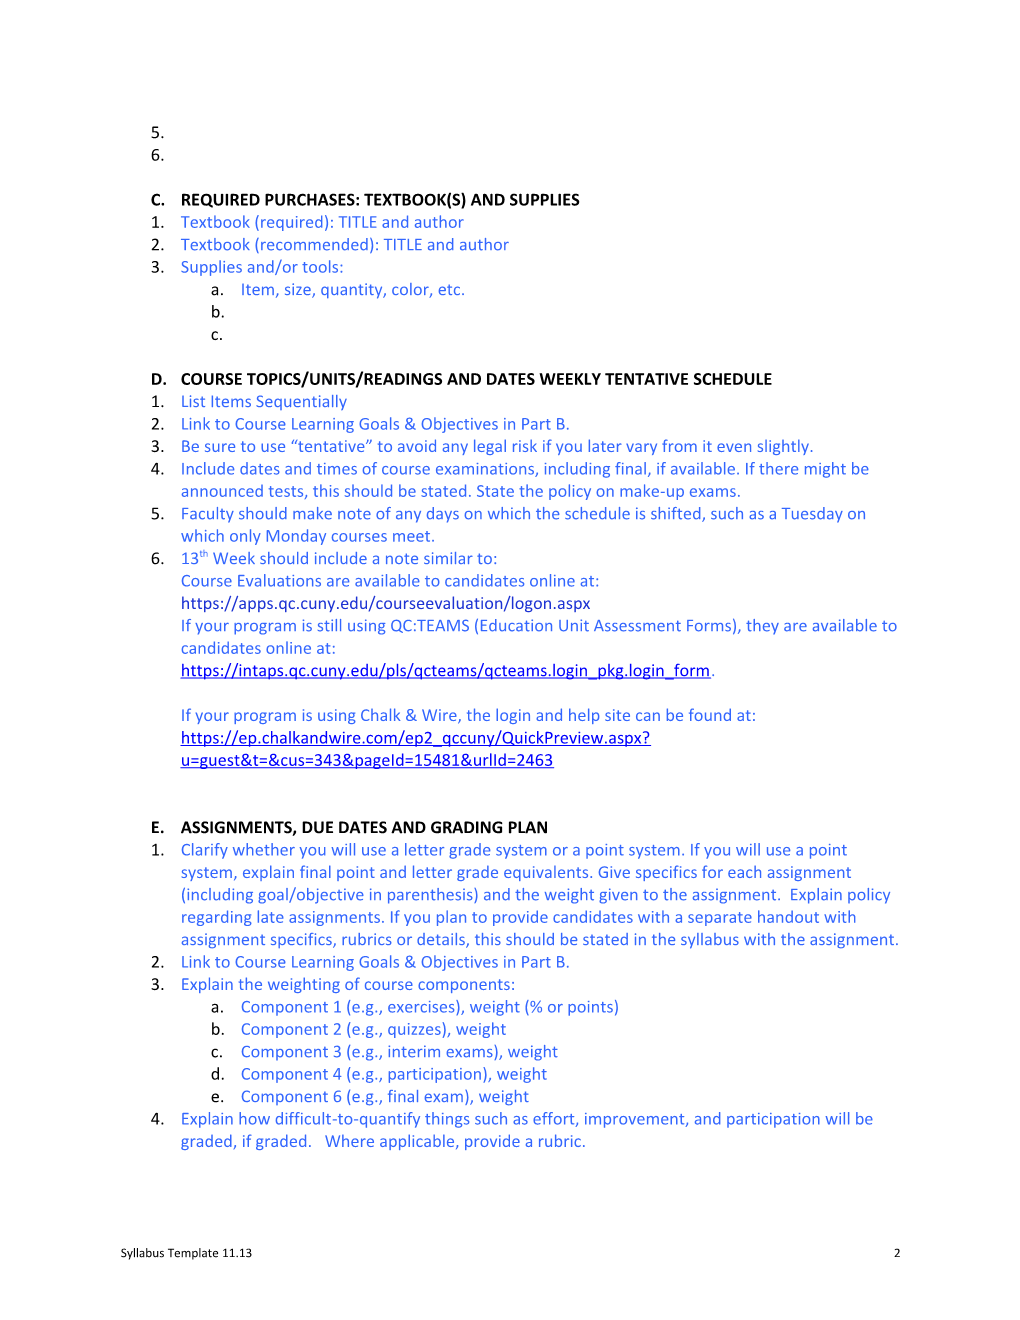 Proposed Syllabus Template